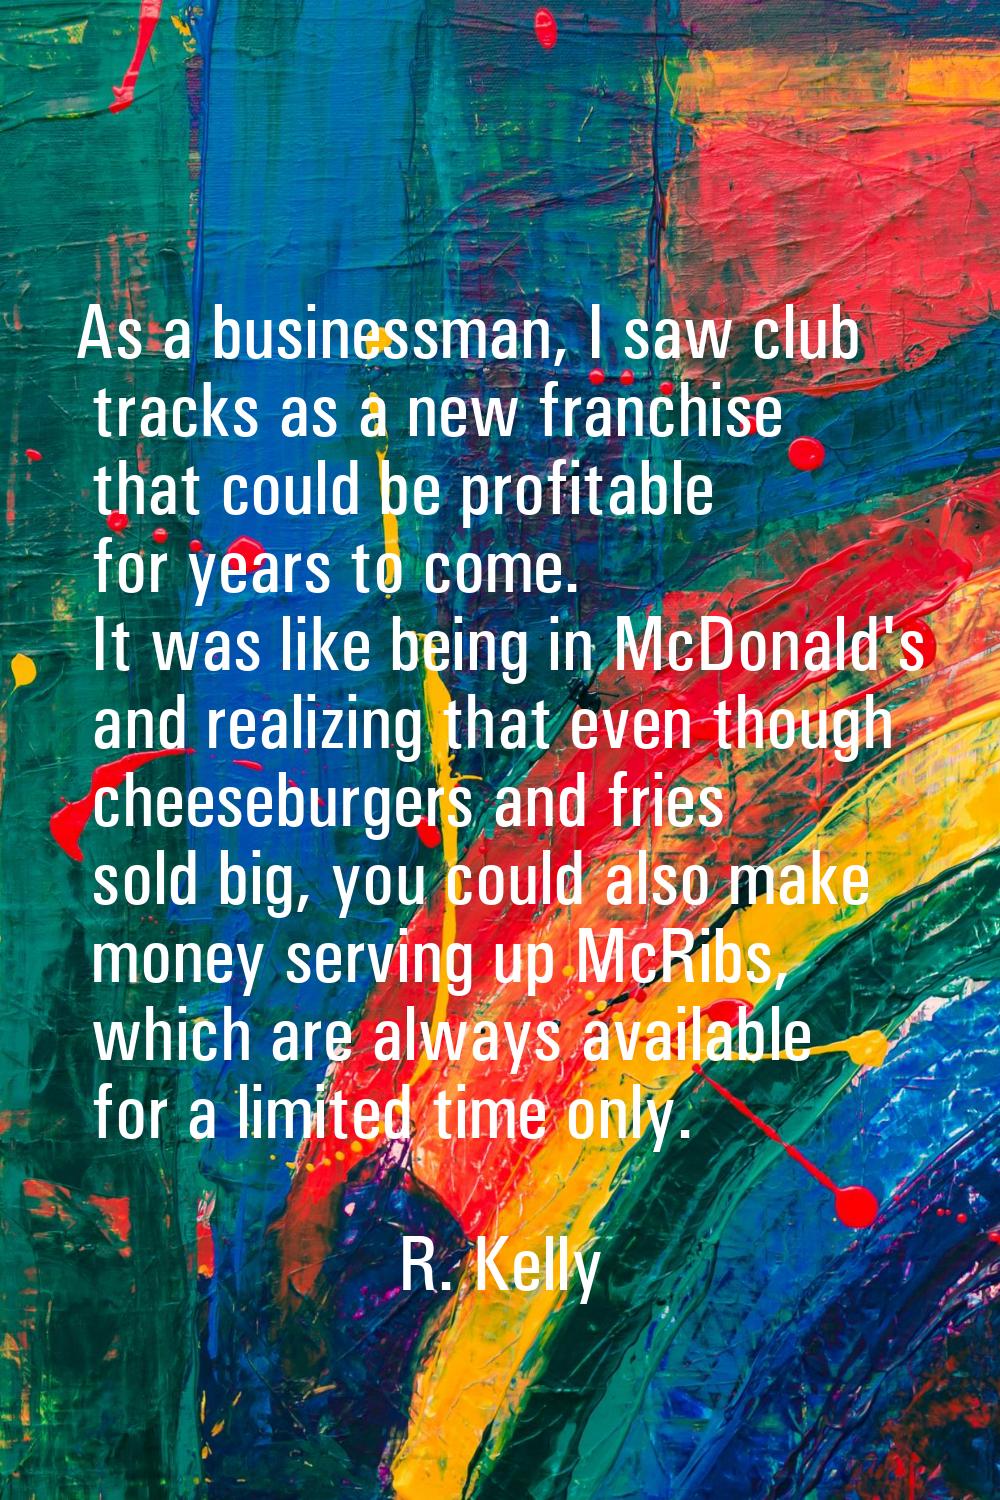 As a businessman, I saw club tracks as a new franchise that could be profitable for years to come. 